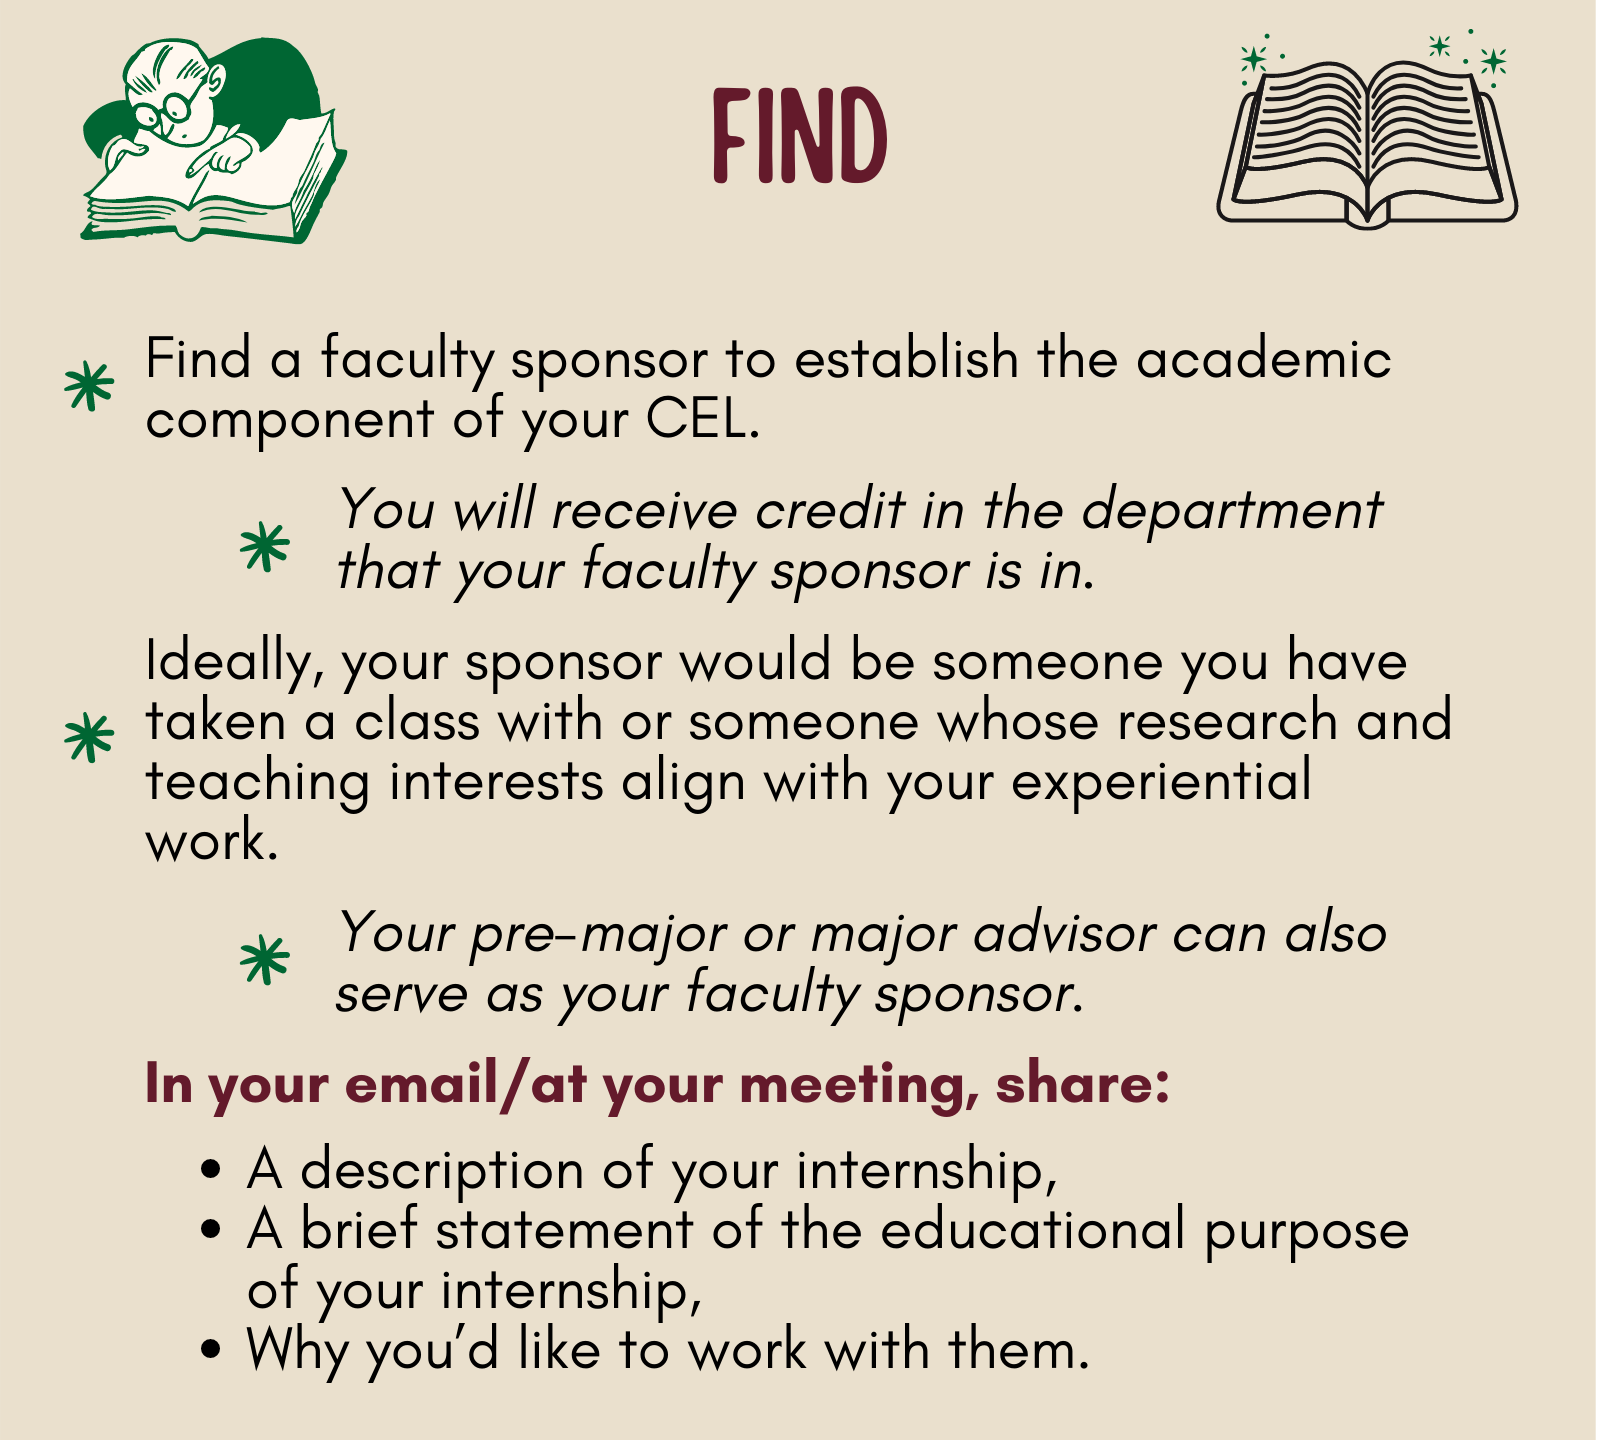 Find a faculty sponsor to oversee the academic component of your CEL.